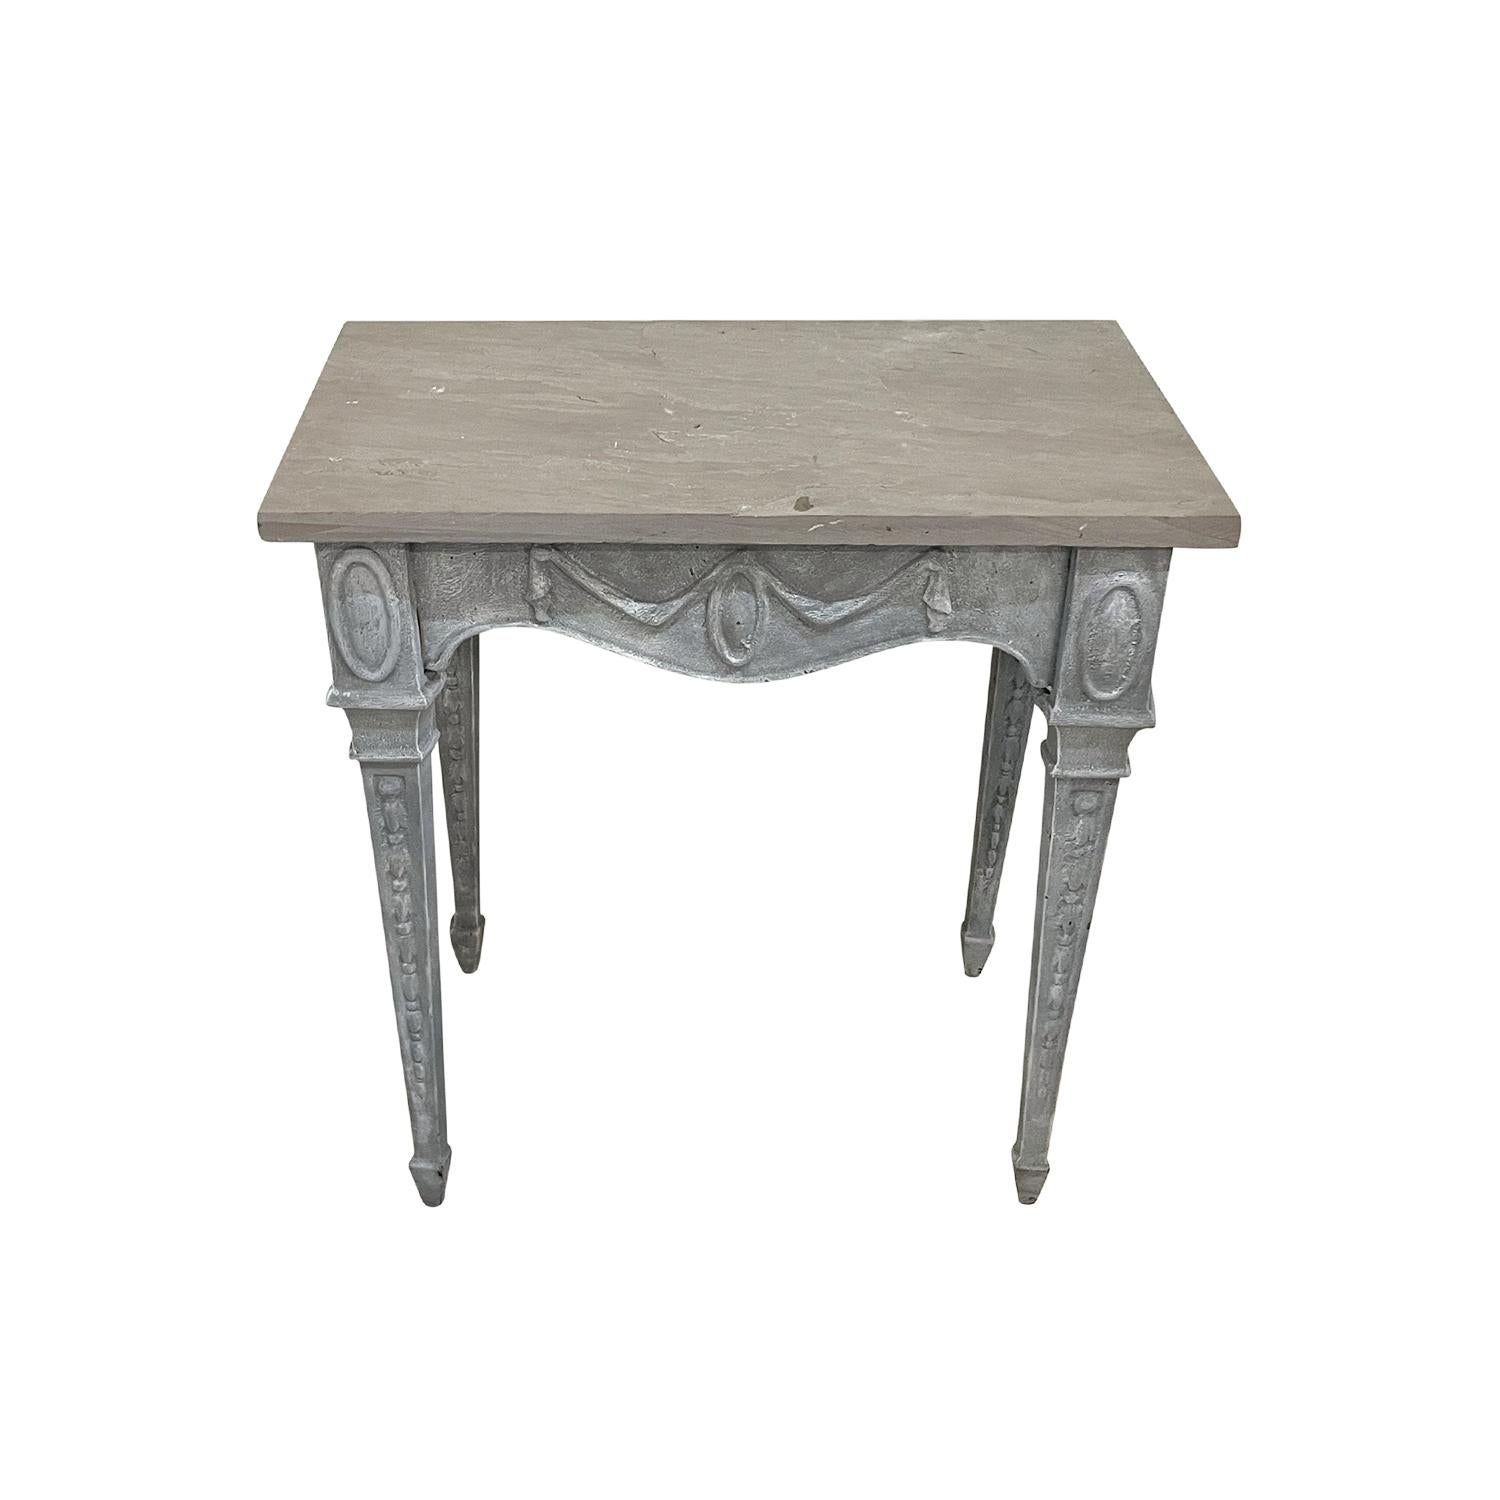 20th Century English Pair of Cast Iron Consoles Tables, Freestanding End Tables In Good Condition For Sale In West Palm Beach, FL